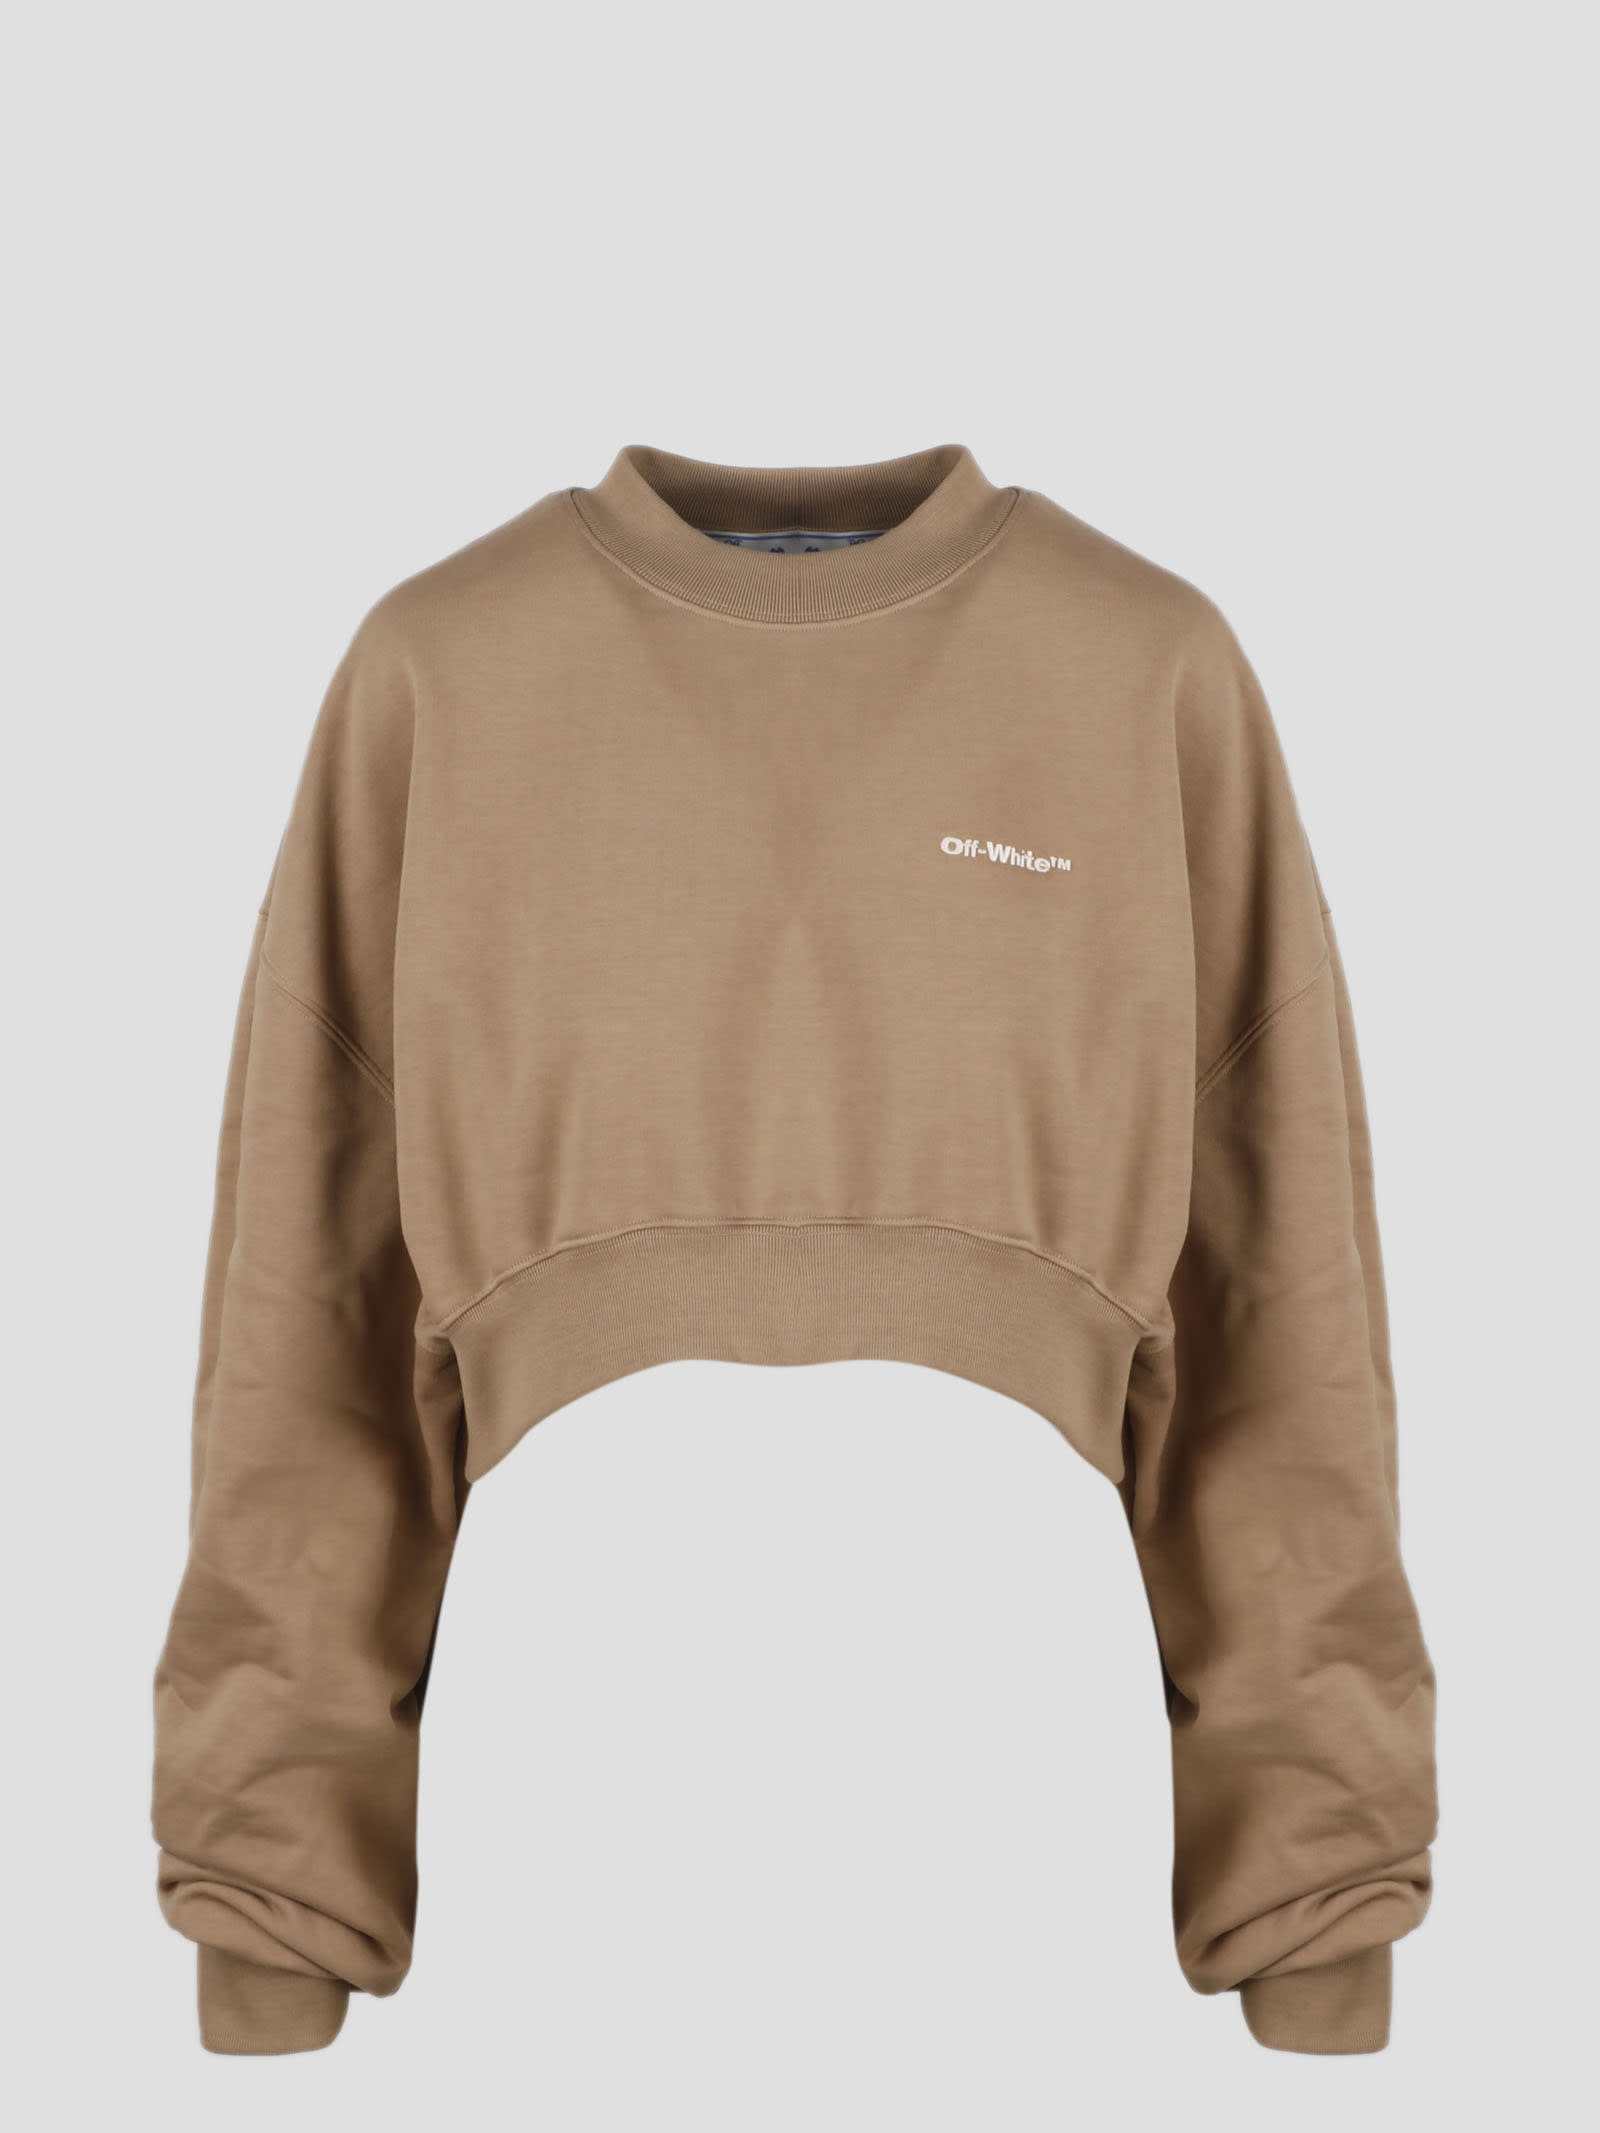 Off-White For All Crop Over Crewneck Sweatshirt